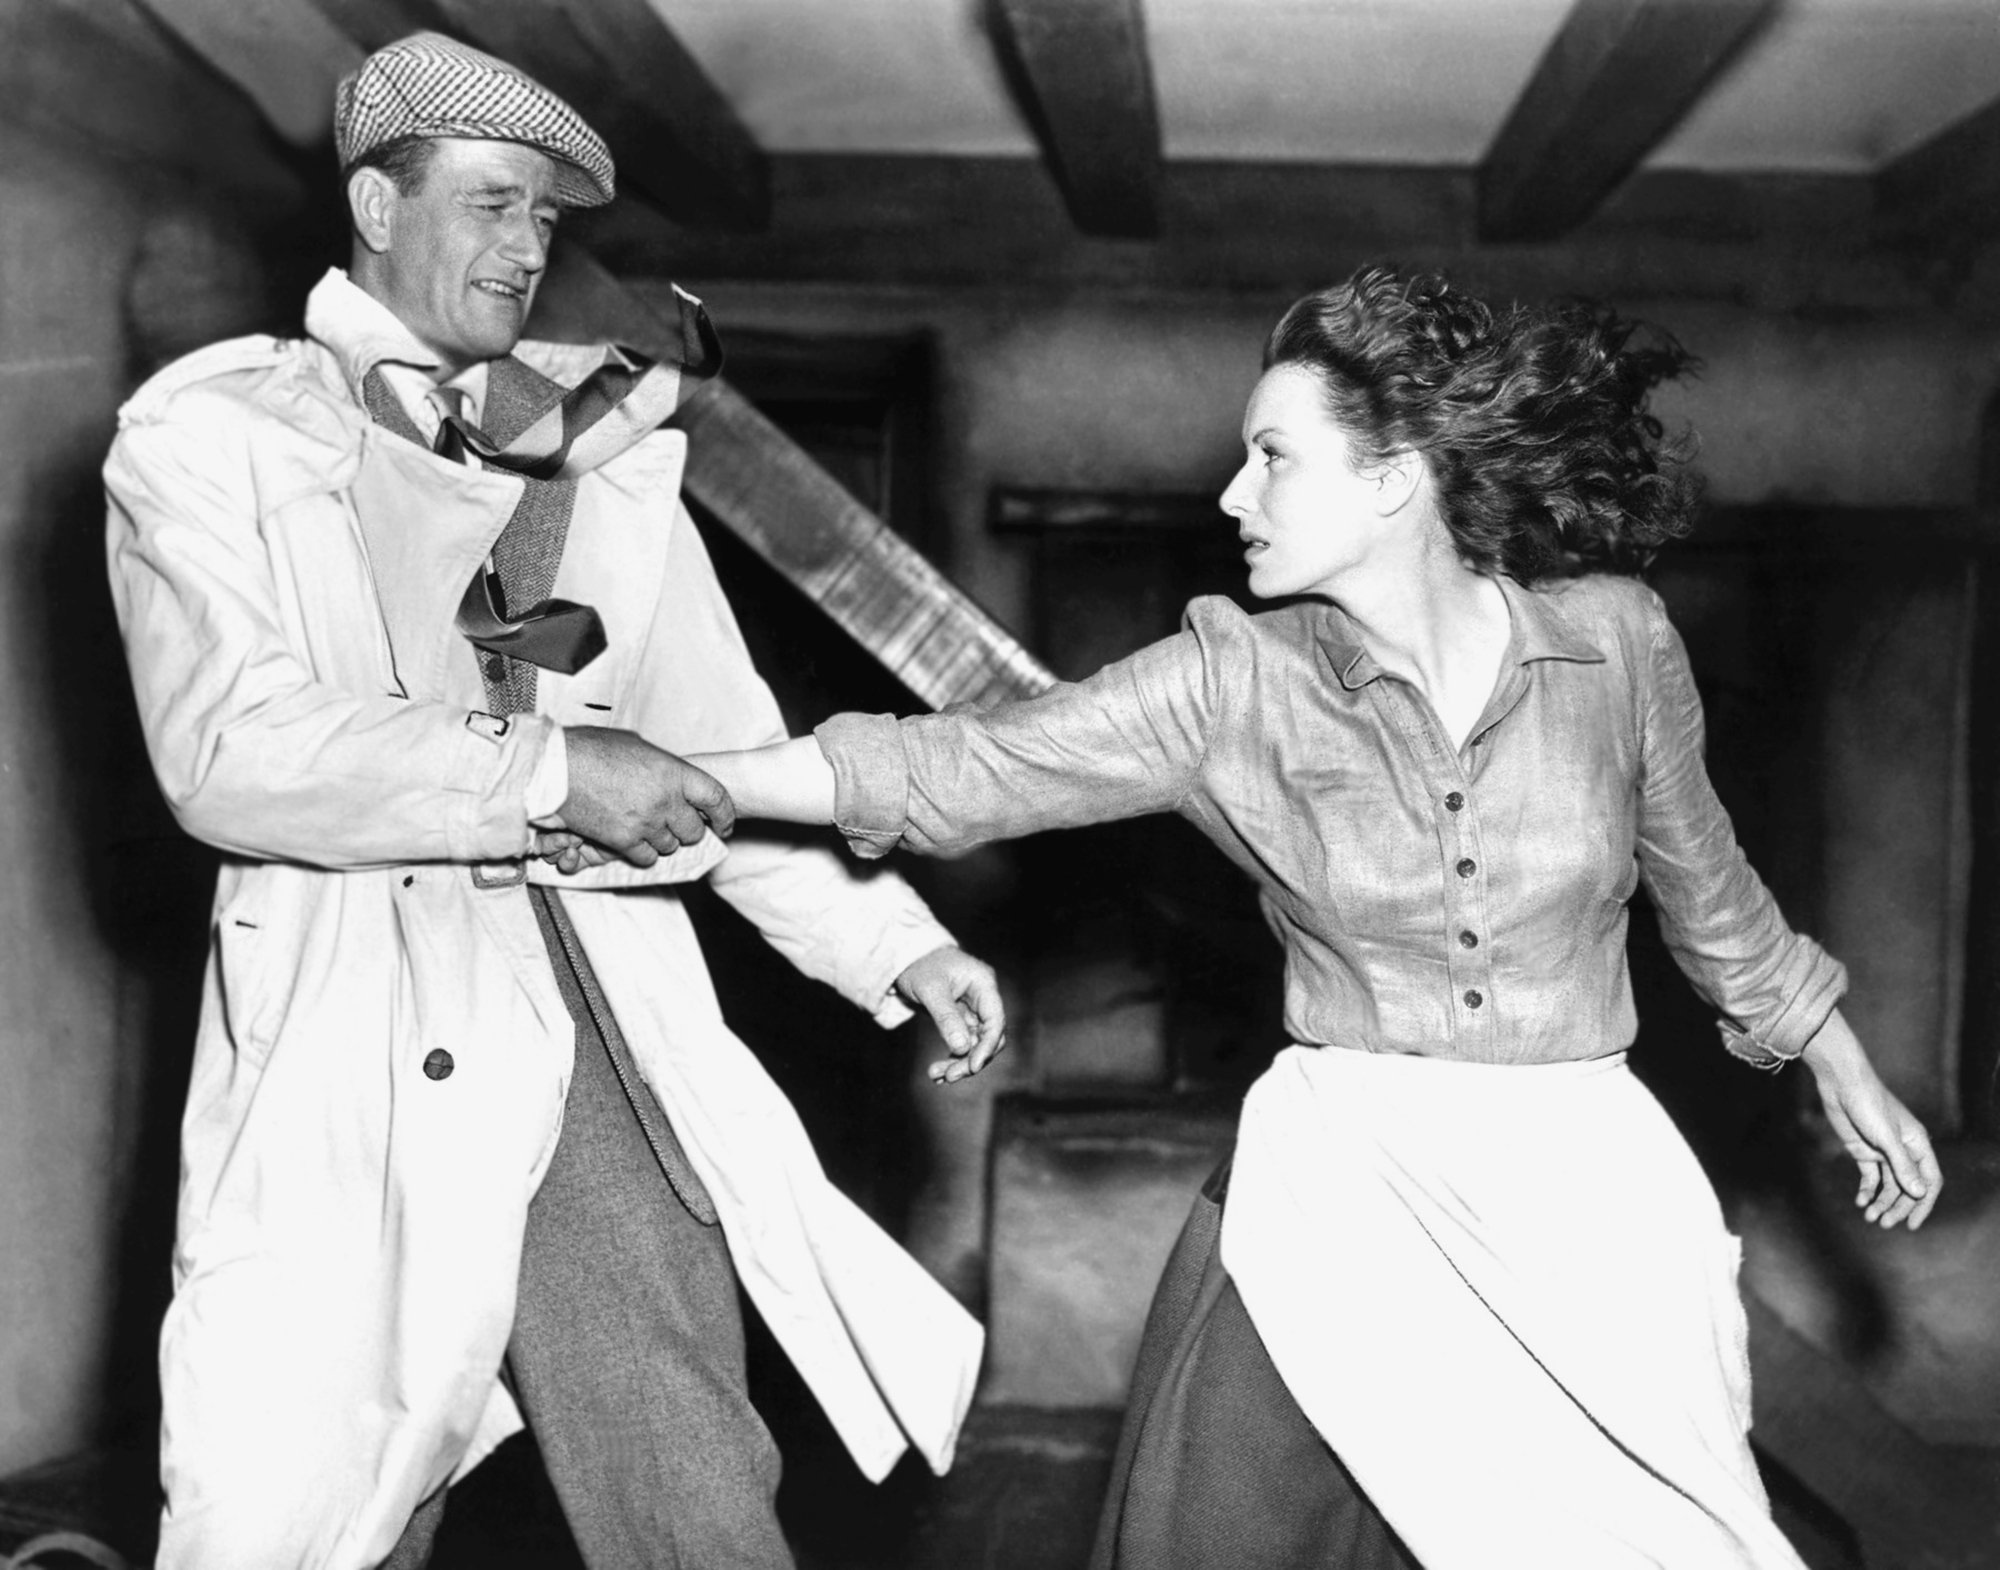 ‘The Quiet Man’: Maureen O’Hara Broke Her Wrist After Trying to ‘Sock’ John Wayne in the Jaw